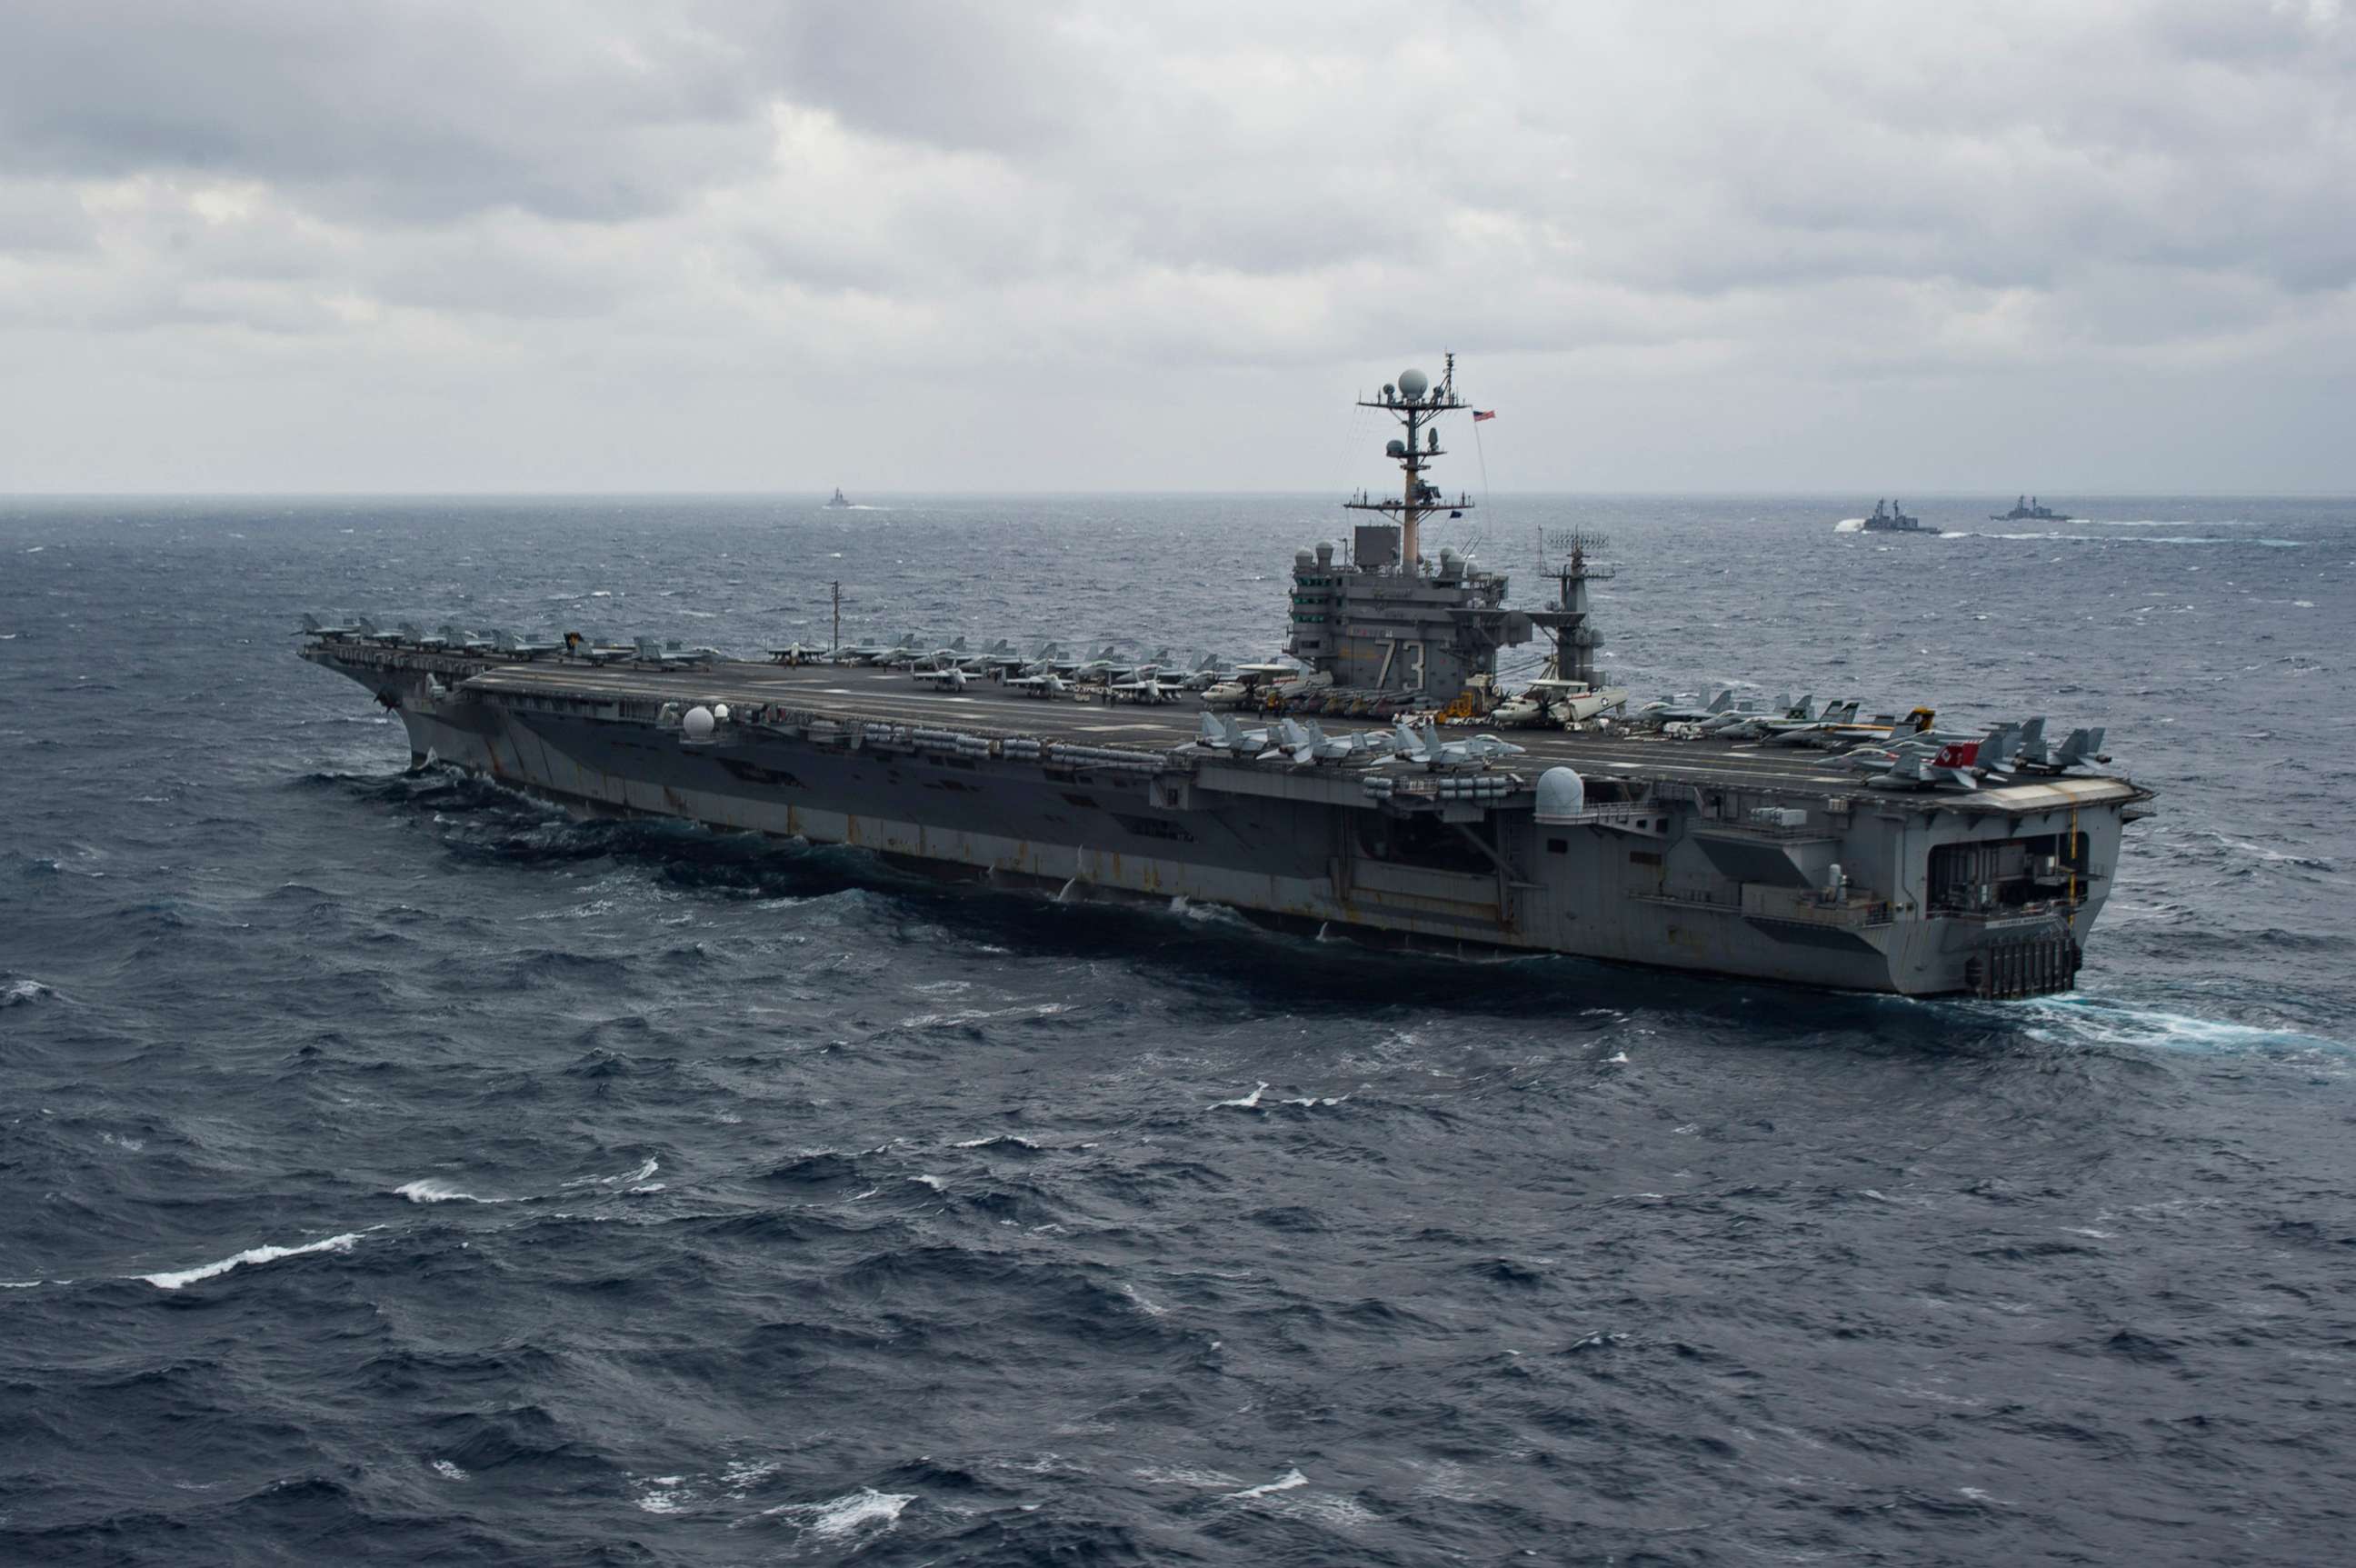 PHOTO: The U.S. Navy's forward deployed aircraft carrier USS George Washington (CVN 73) and Japan Maritime Self-Defense Force ships participate in tactical maneuver training during Annual Exercise, Nov. 28, 2013.